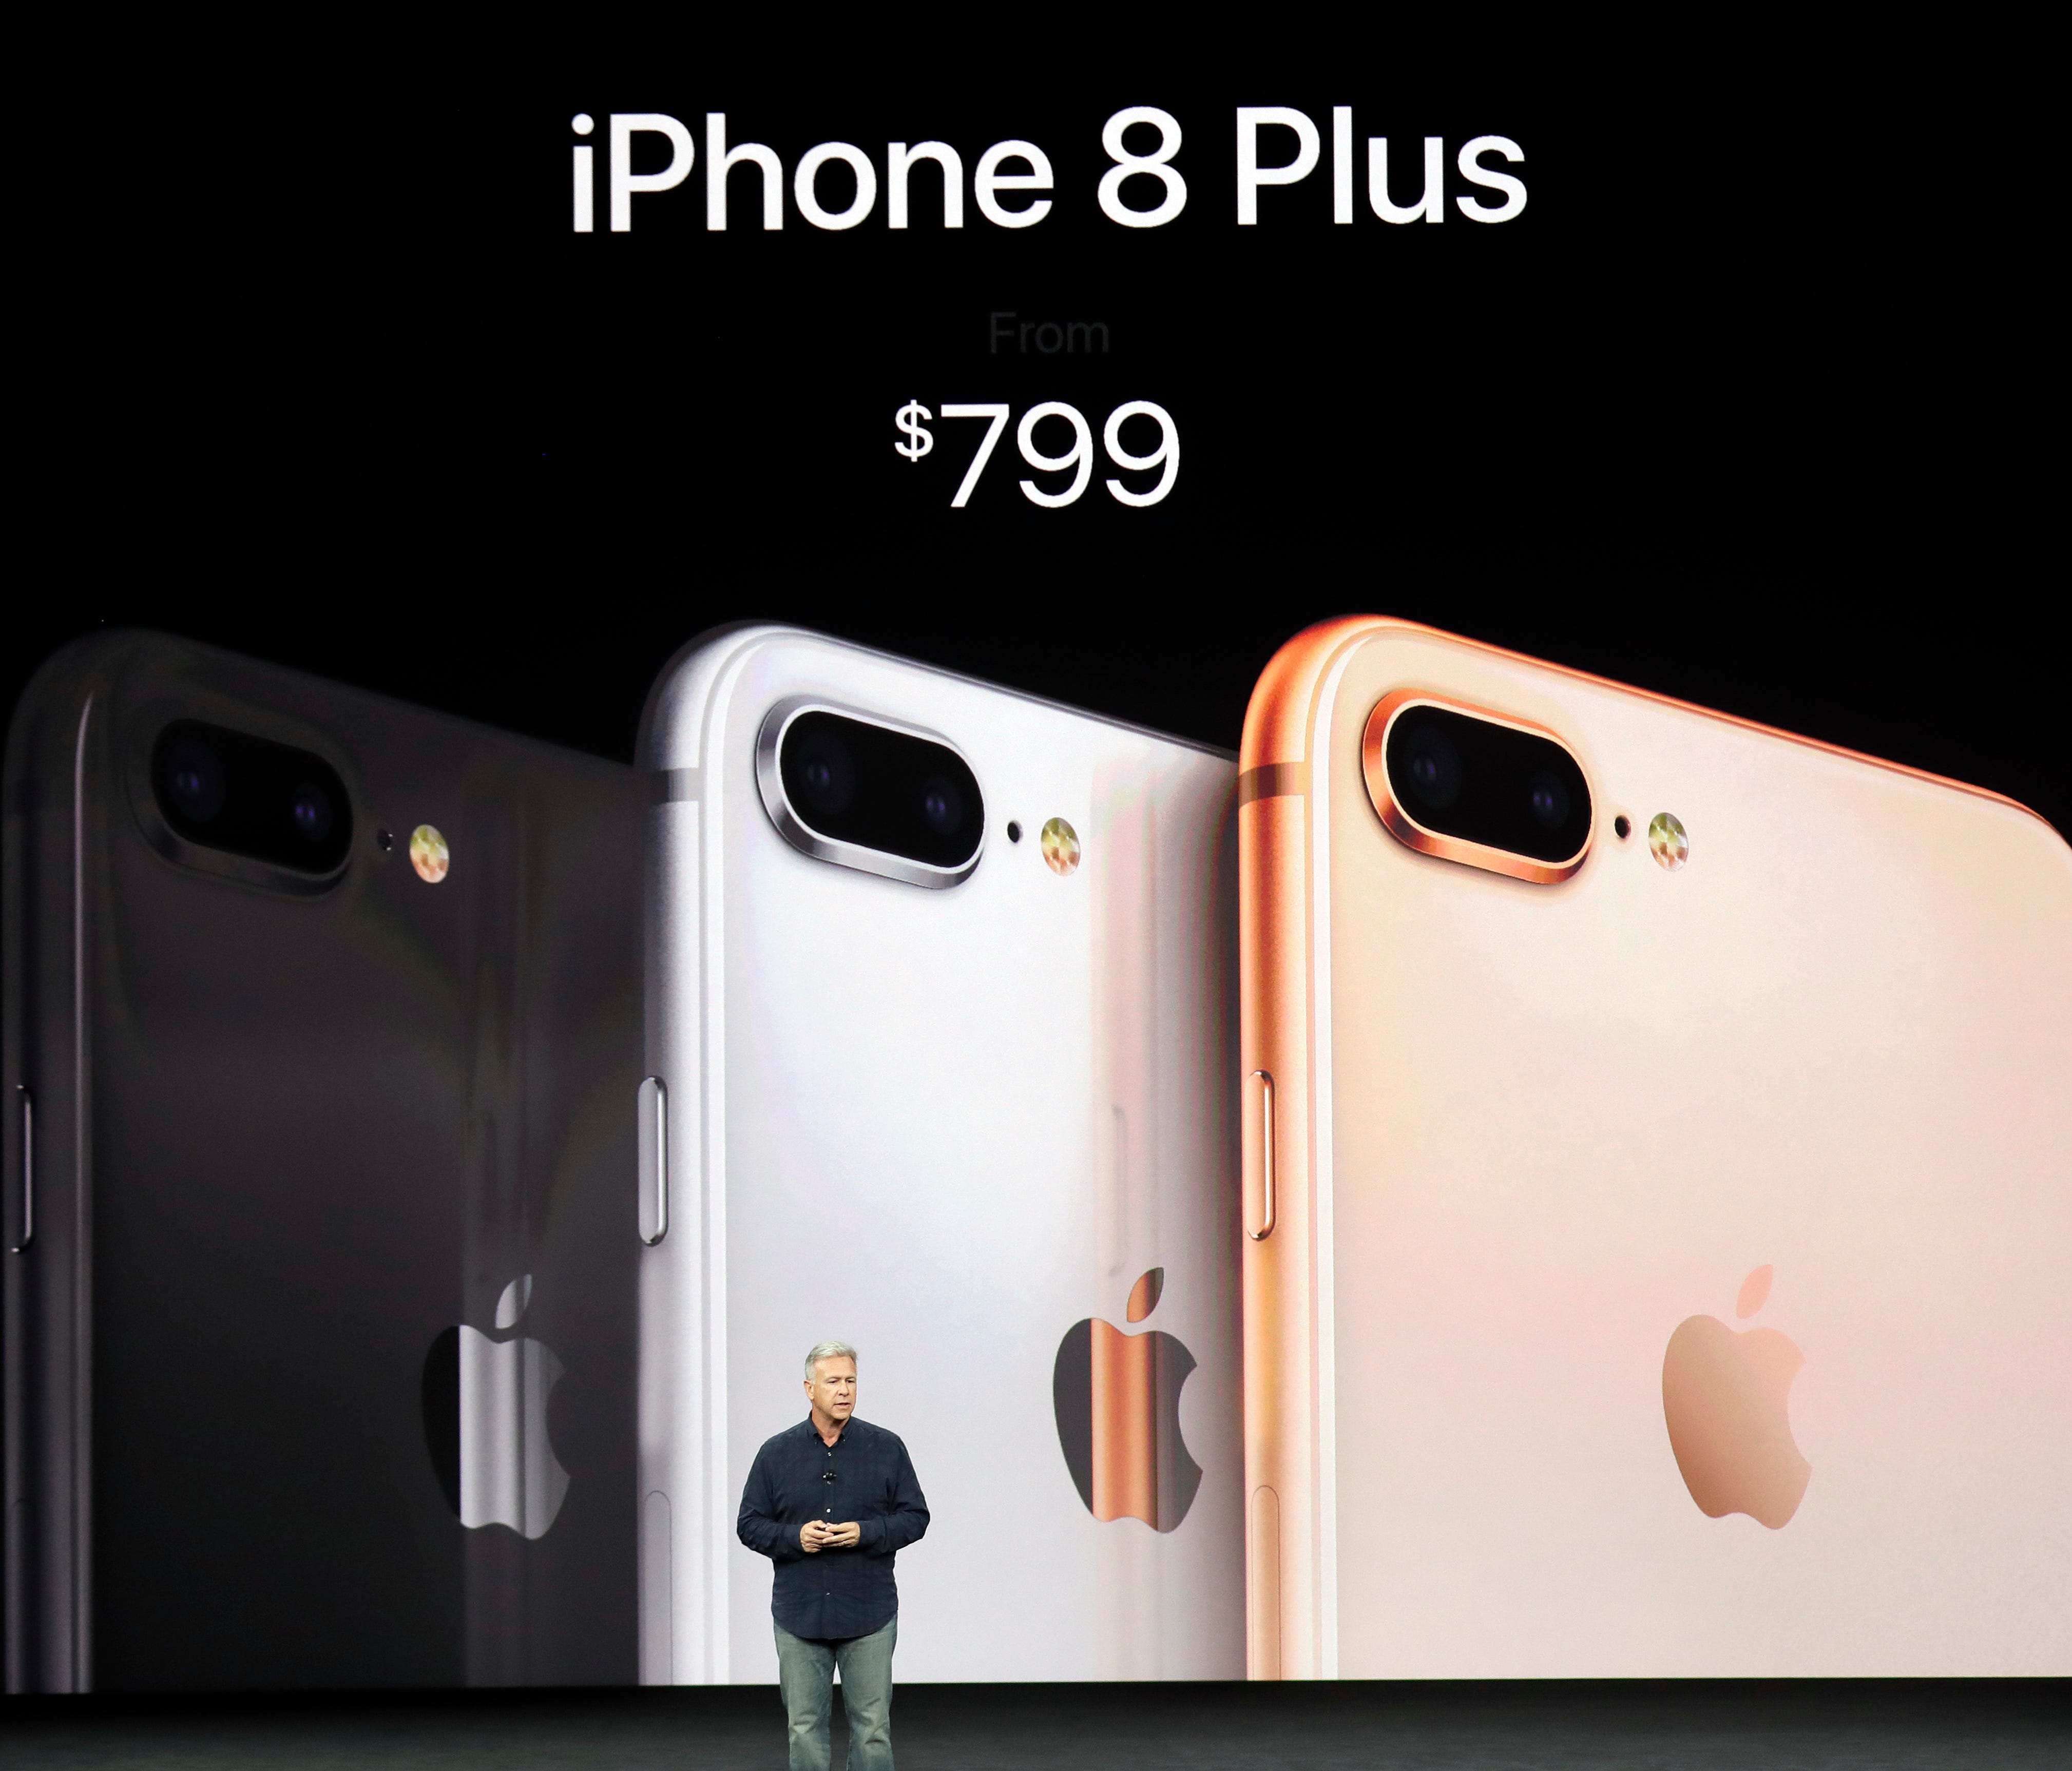 Phil Schiller, Apple's senior vice president of worldwide marketing talks about pricing for the new iPhone 8 Plus.